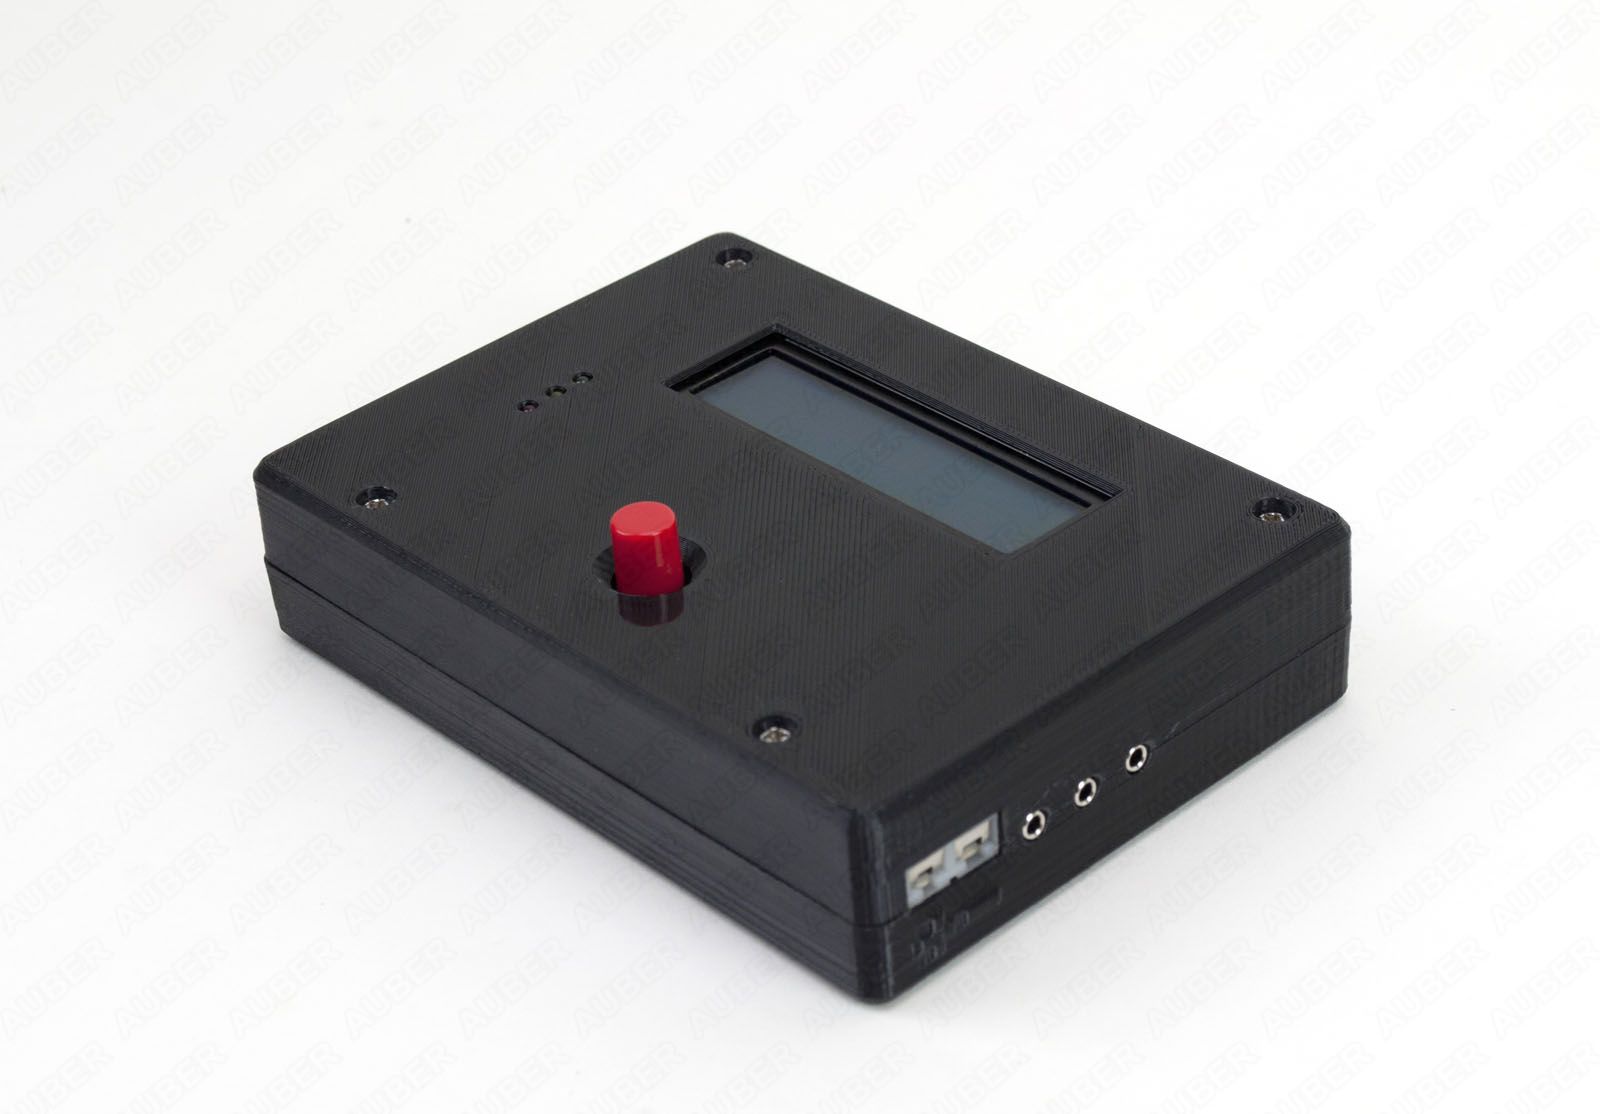 HeaterMeter 3D Printed Case with Defects